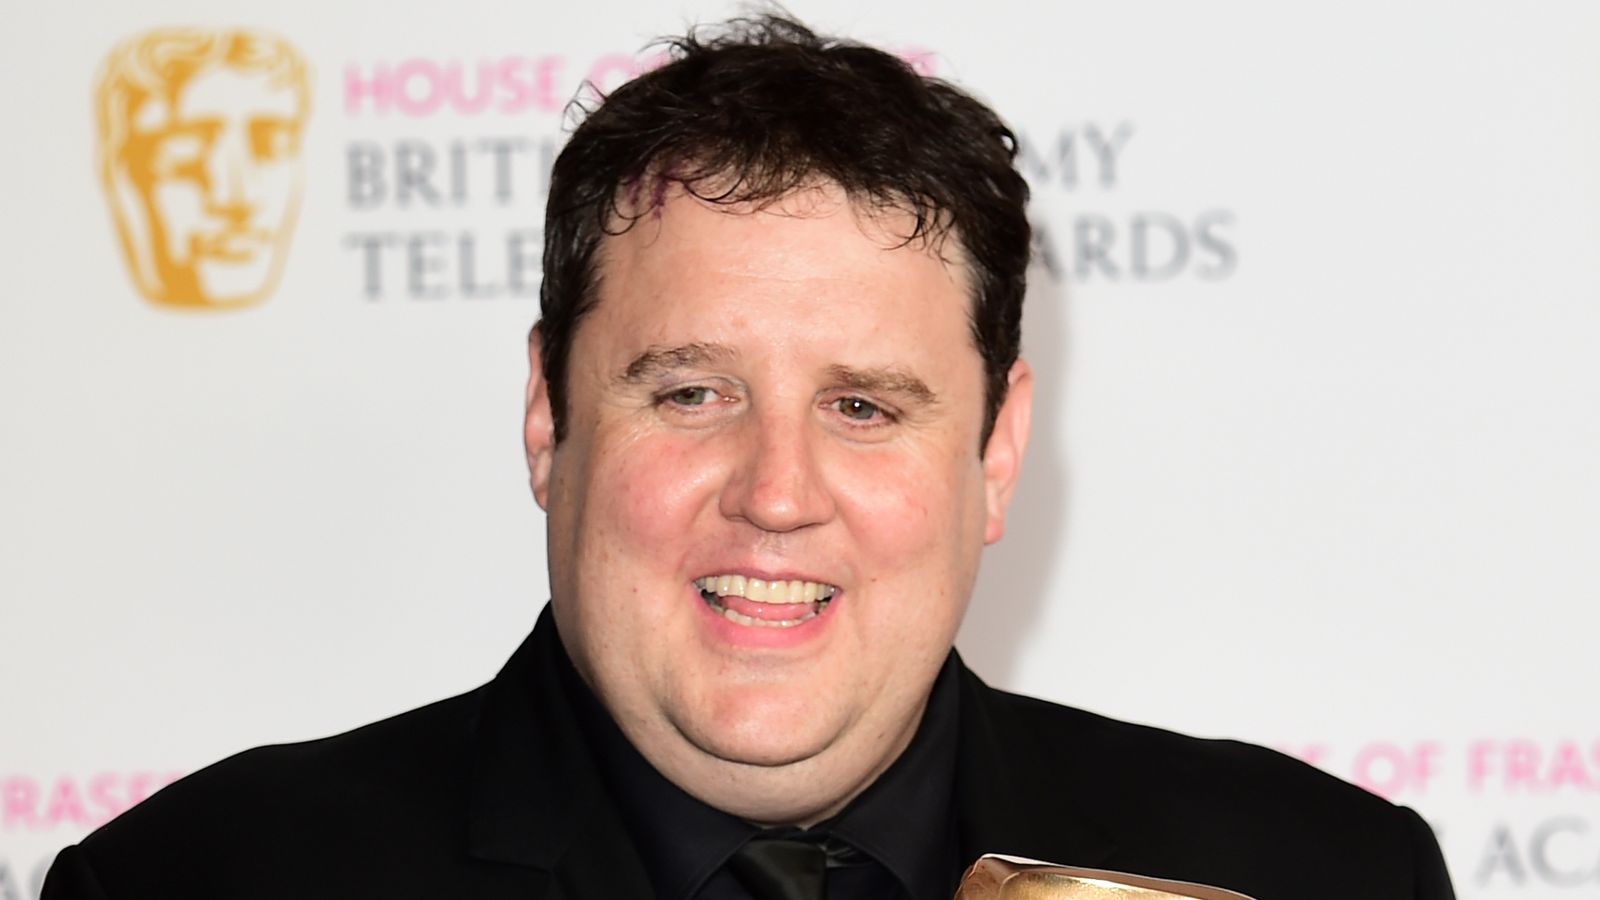 Peter Kay tour: O2 Priority website crashes due to 'extraordinary' demand for tickets